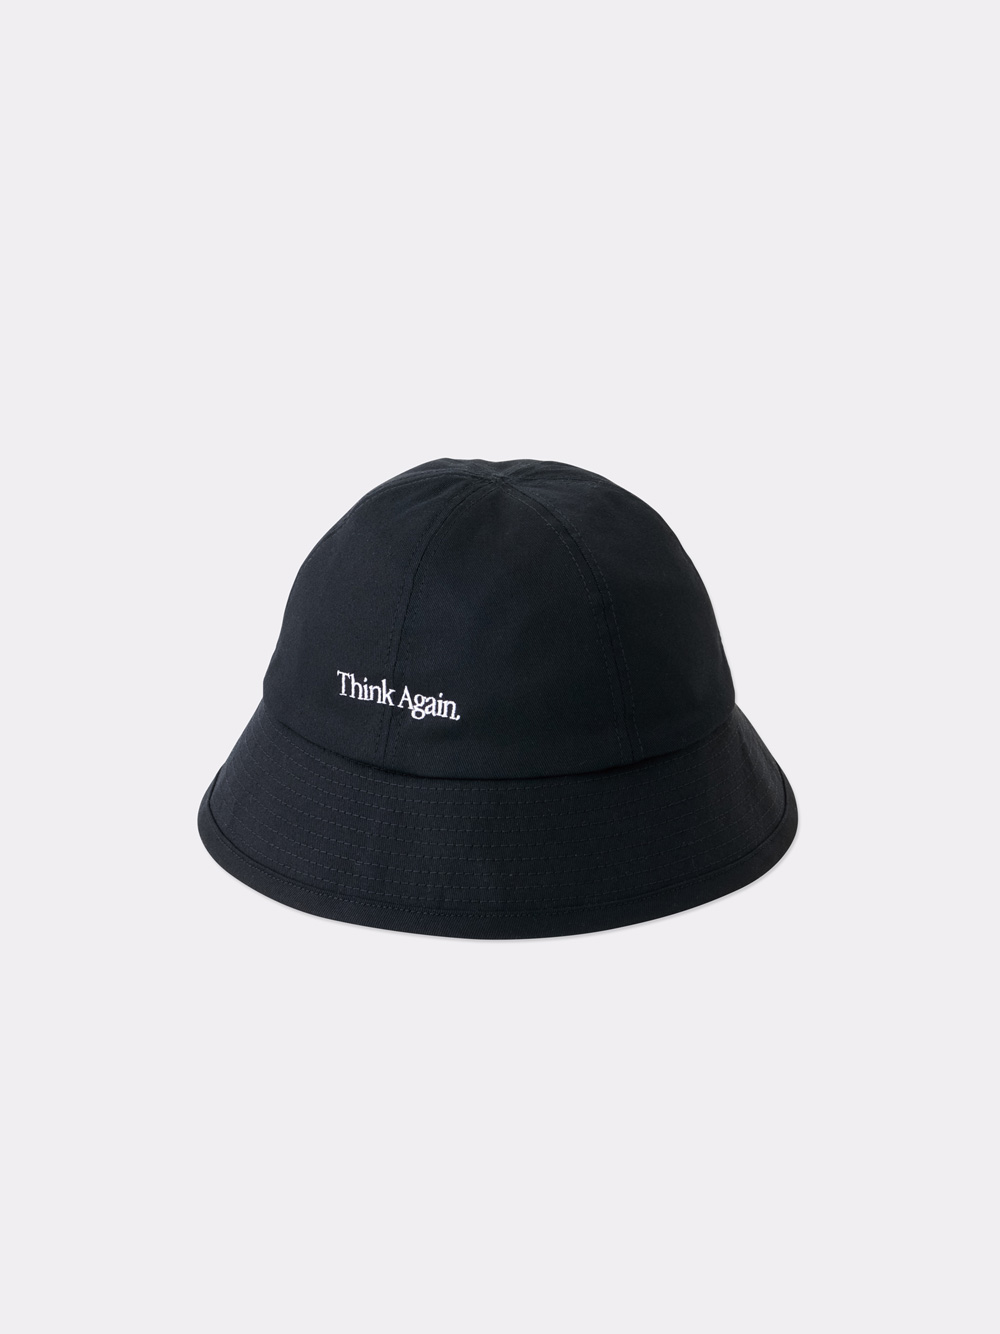 PANEL HAT - Think Again(ACCESSORIES)｜SOFTHYPHEN （ソフトハイフン